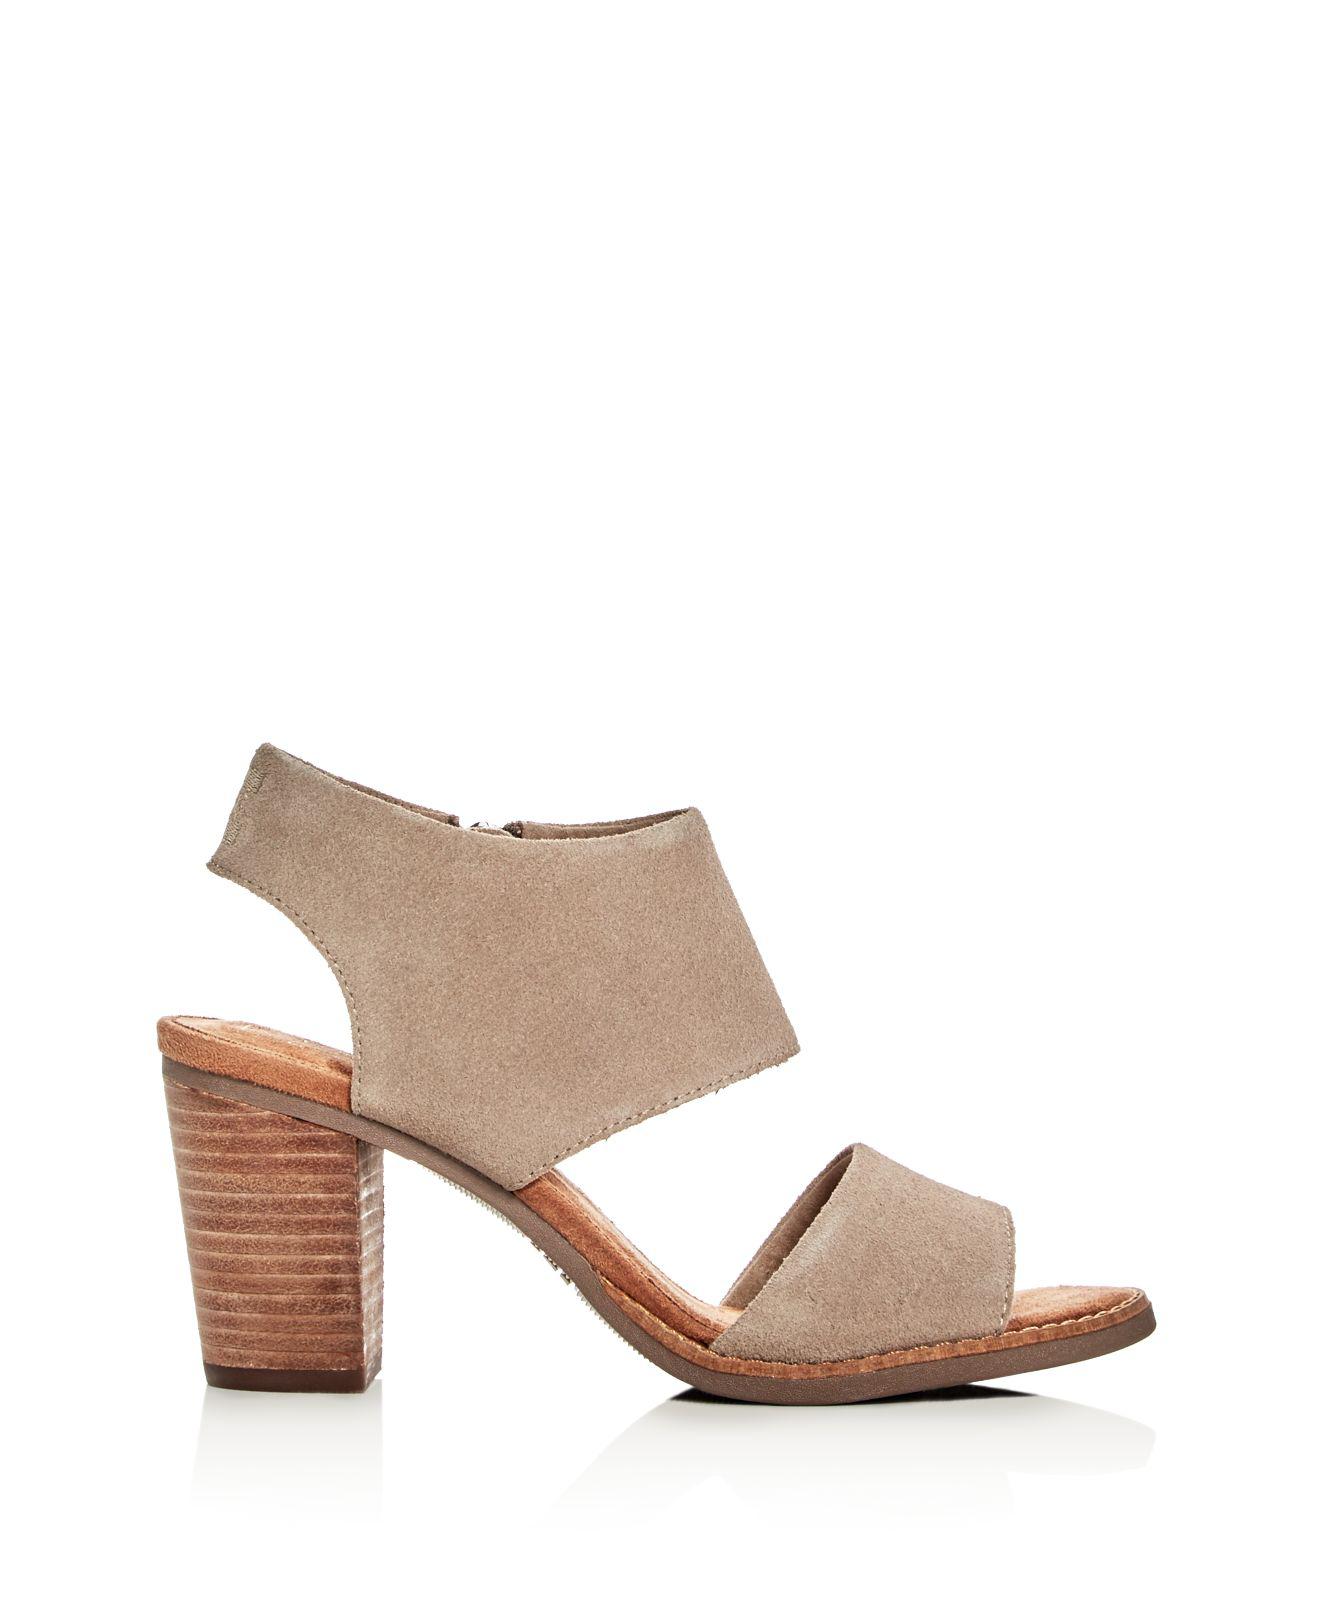 TOMS Women's Majorca Suede Cut Out Block Heel Sandals in Natural - Lyst